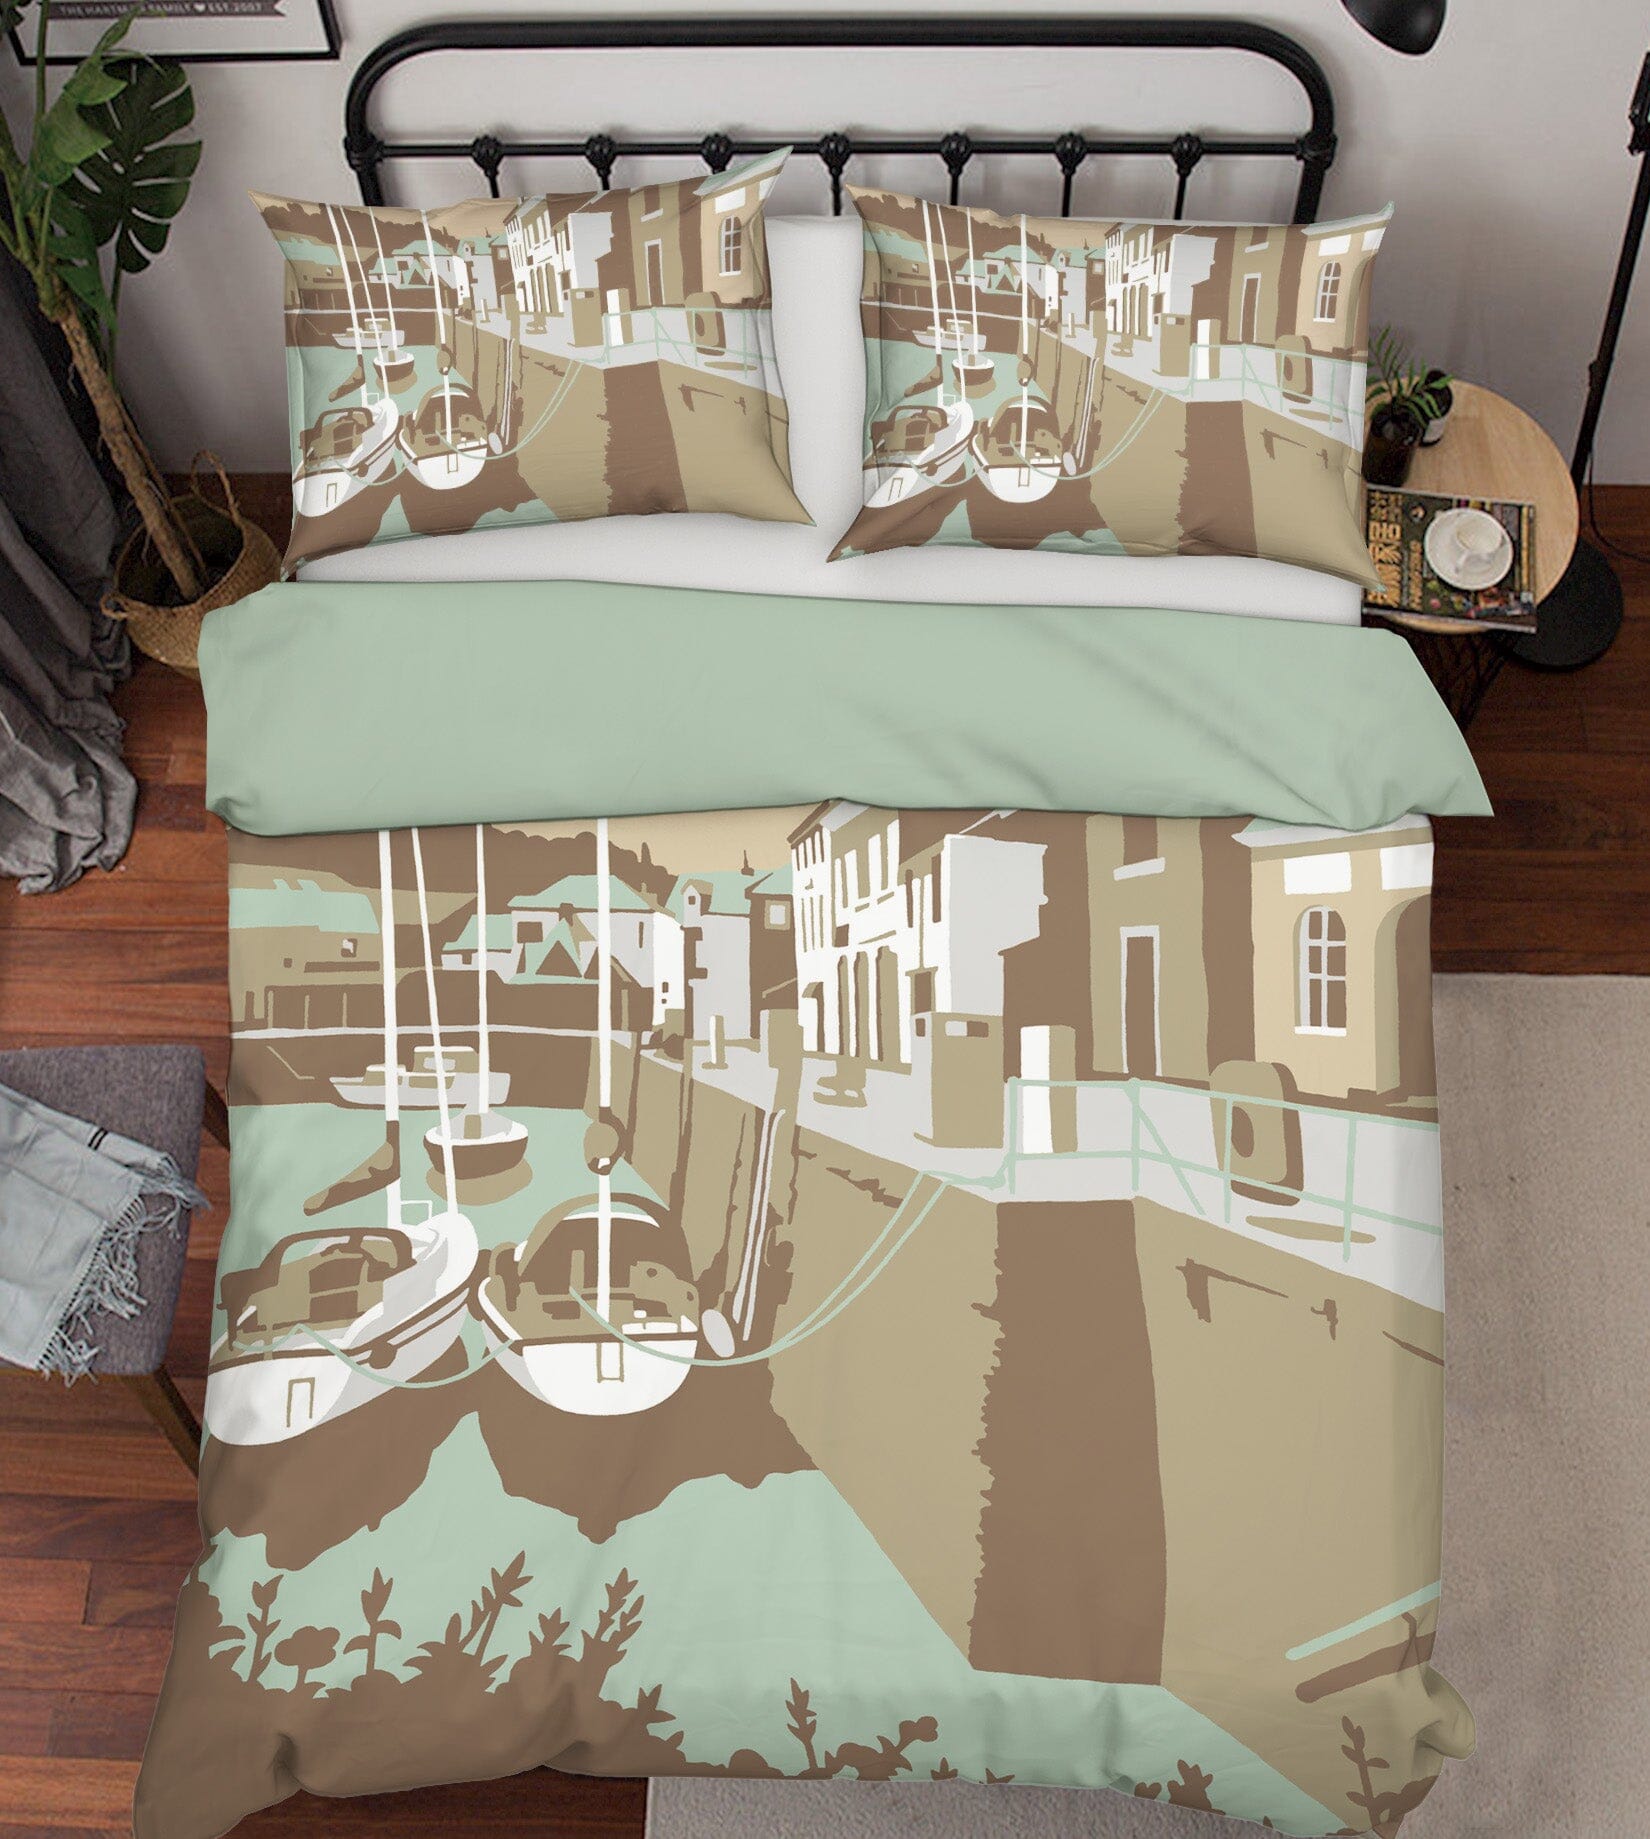 3D Padstow 2034 Steve Read Bedding Bed Pillowcases Quilt Quiet Covers AJ Creativity Home 